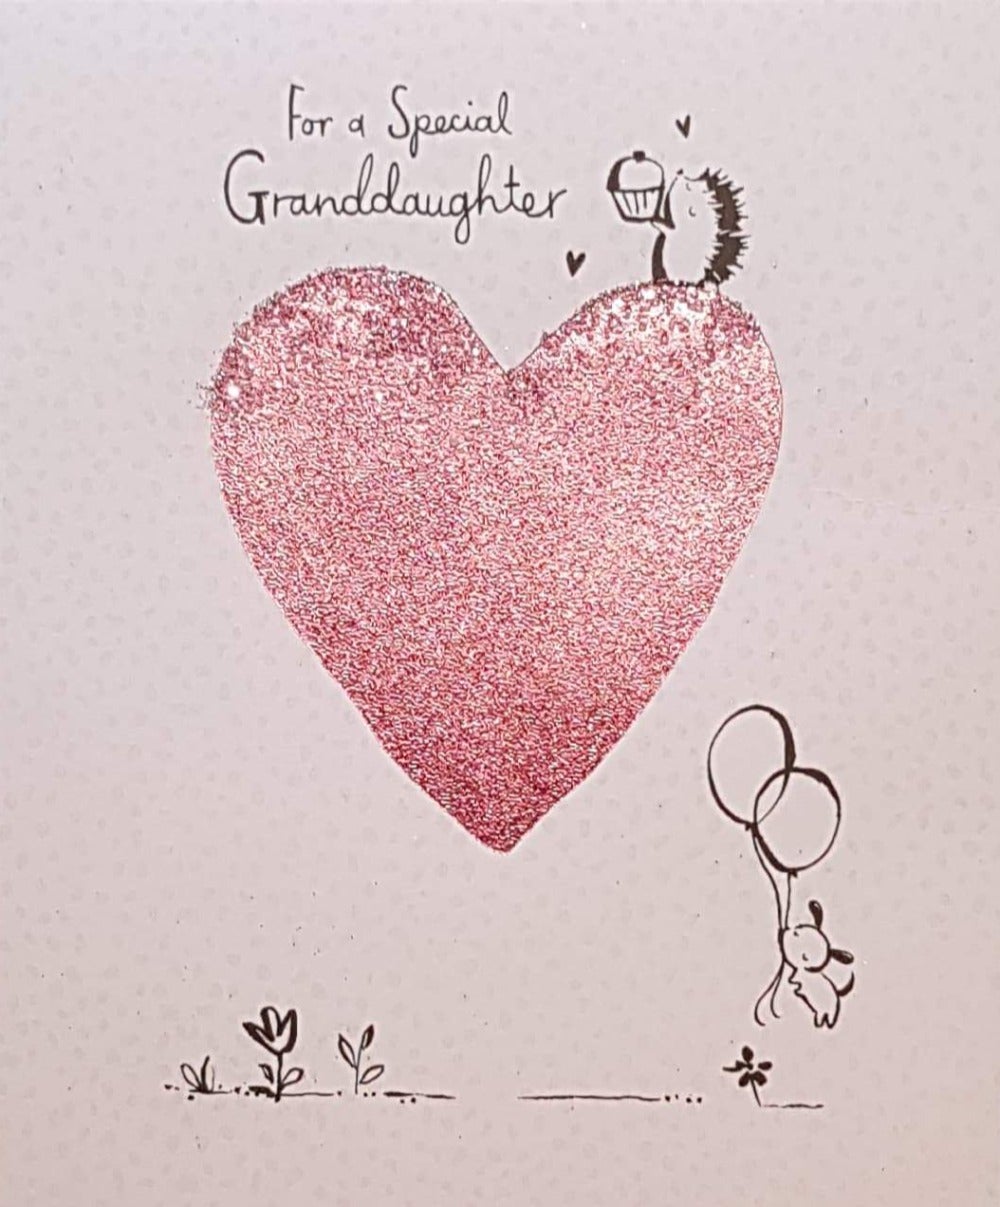 Birthday Card - Granddaughter / A Big Pink Glittery Porcupine